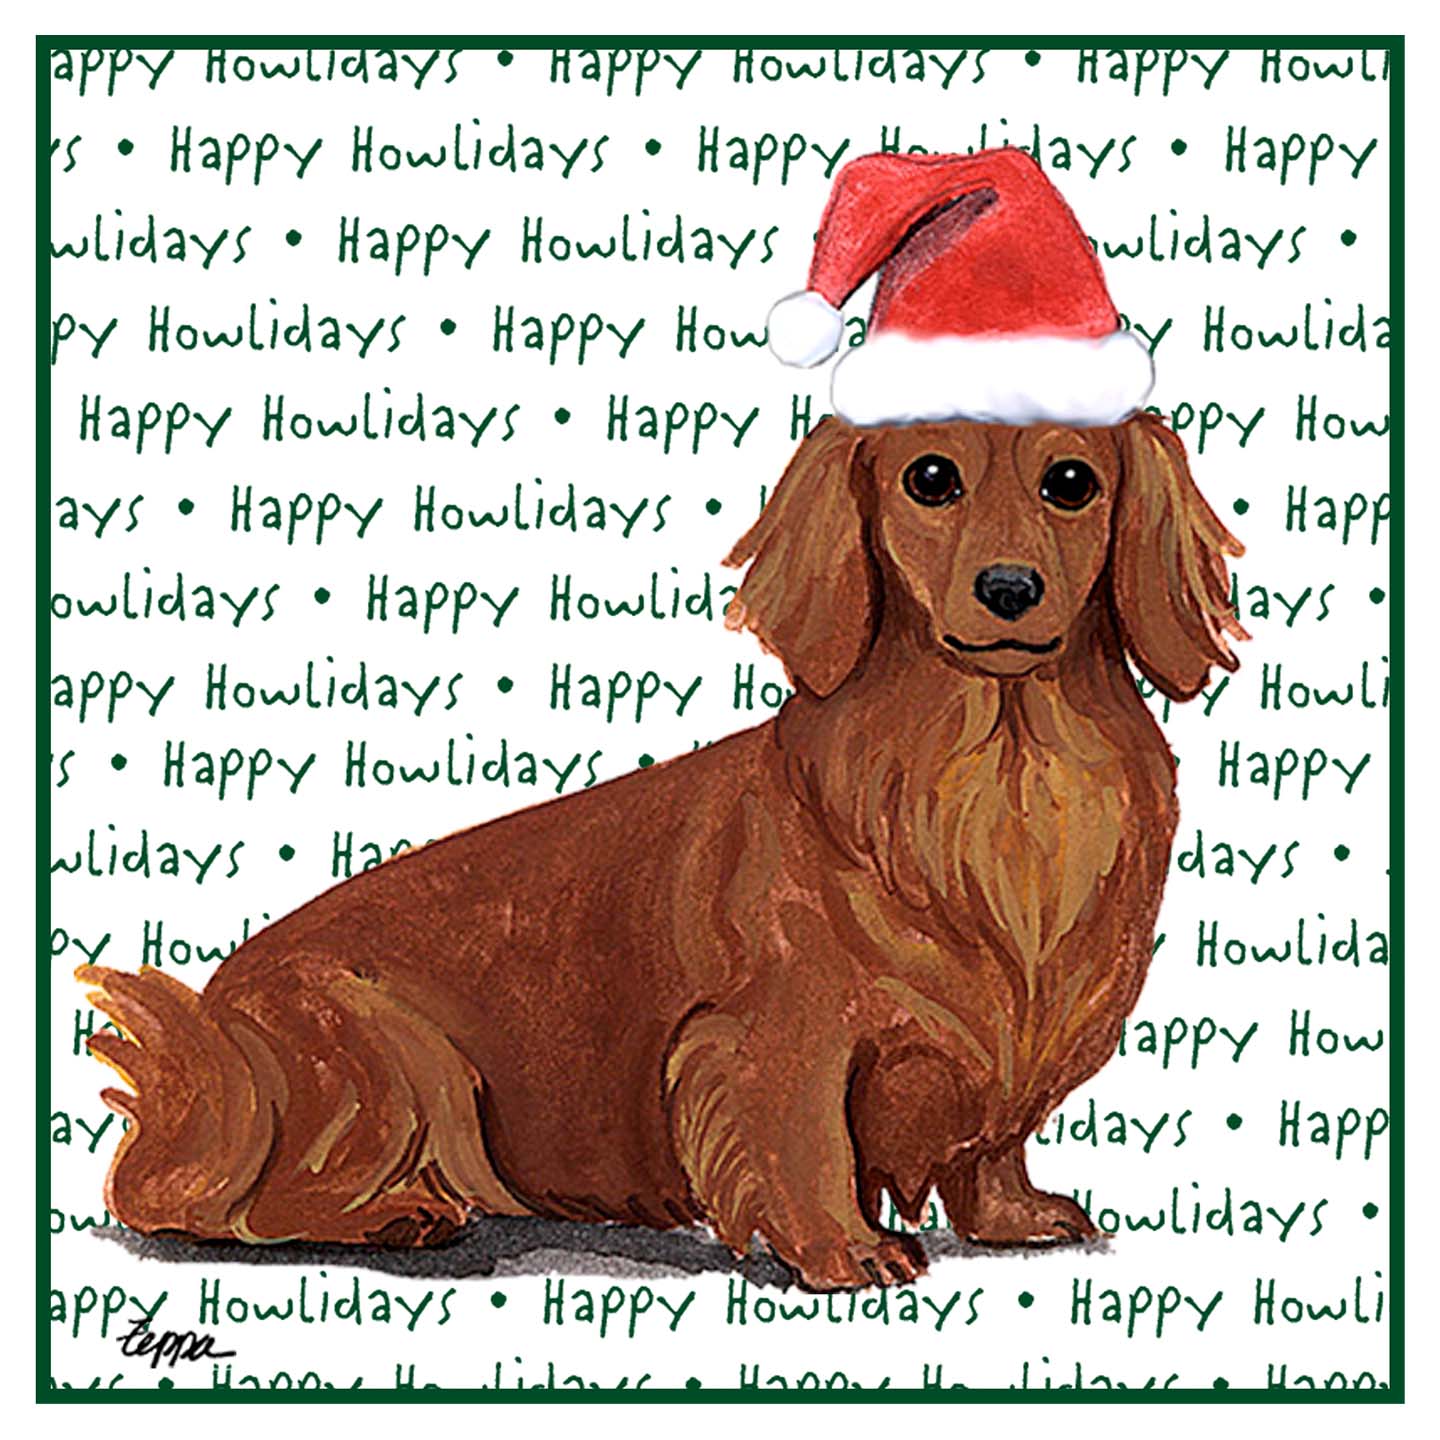 Dachshund (Red Long Haired) Happy Howlidays Text - Women's V-Neck T-Shirt